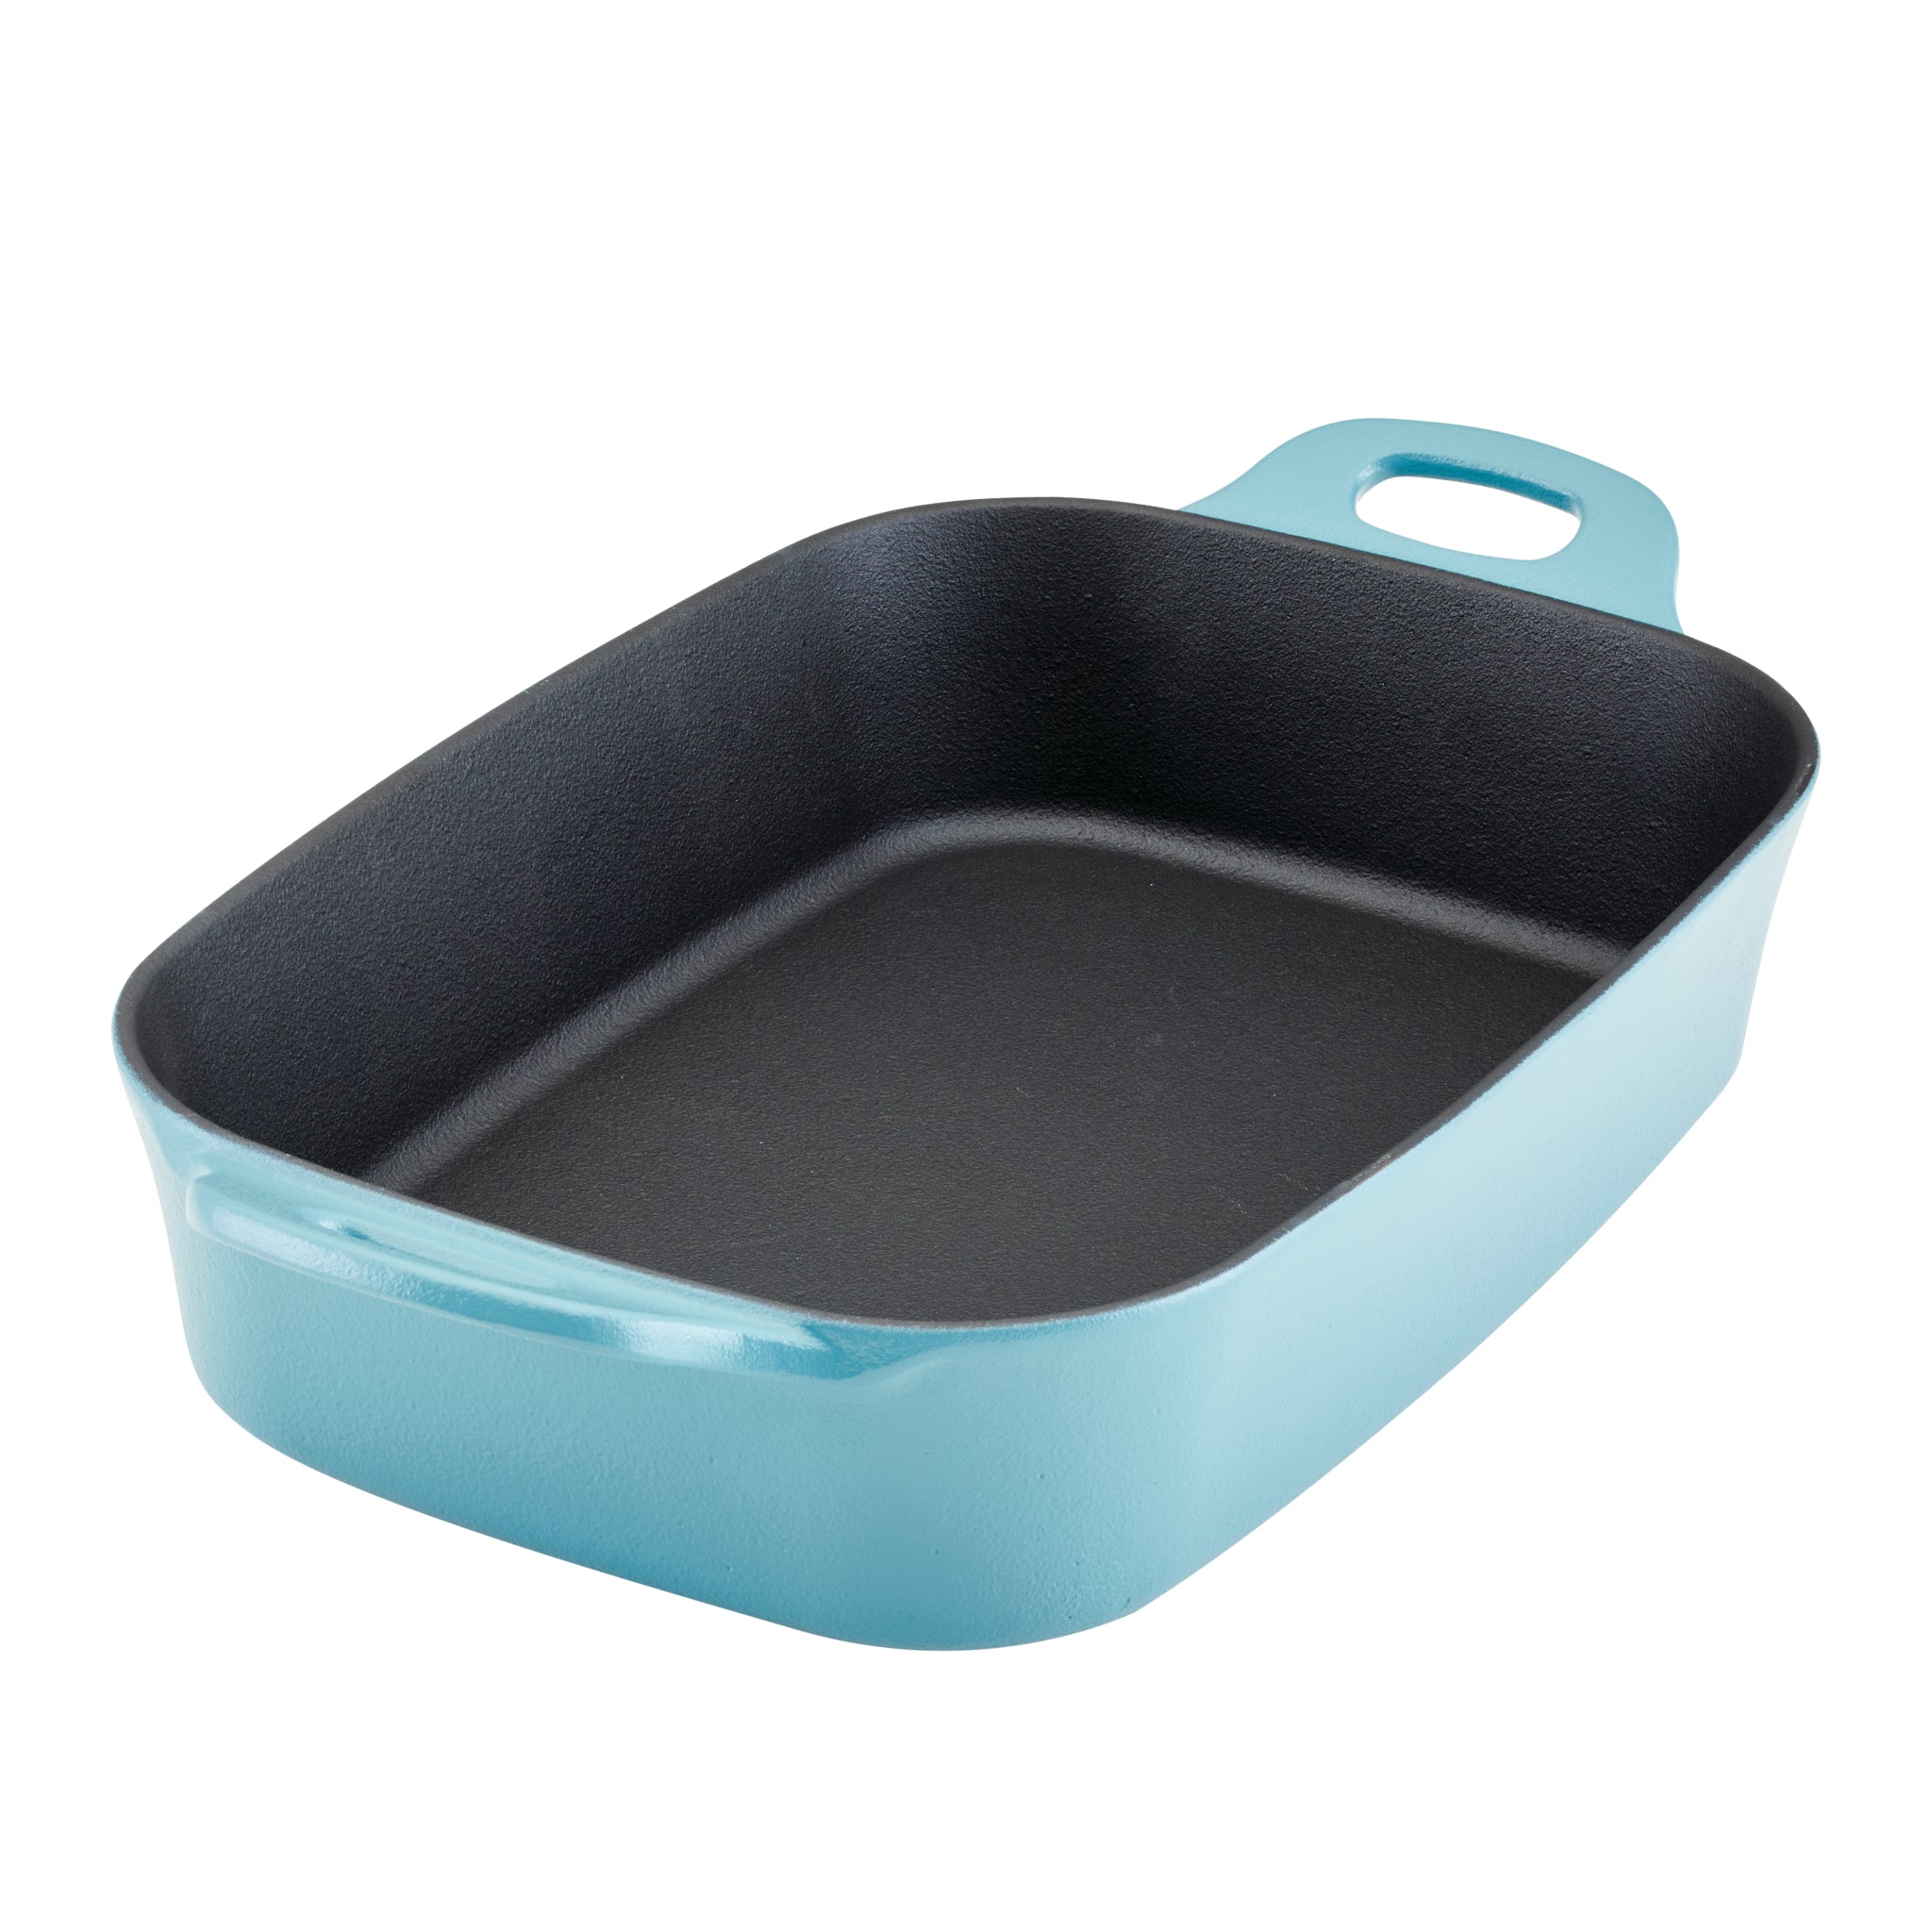 Rachael Ray NITRO Cast Iron 6.5-qt. Dutch Oven, Color: Agave Blue - JCPenney